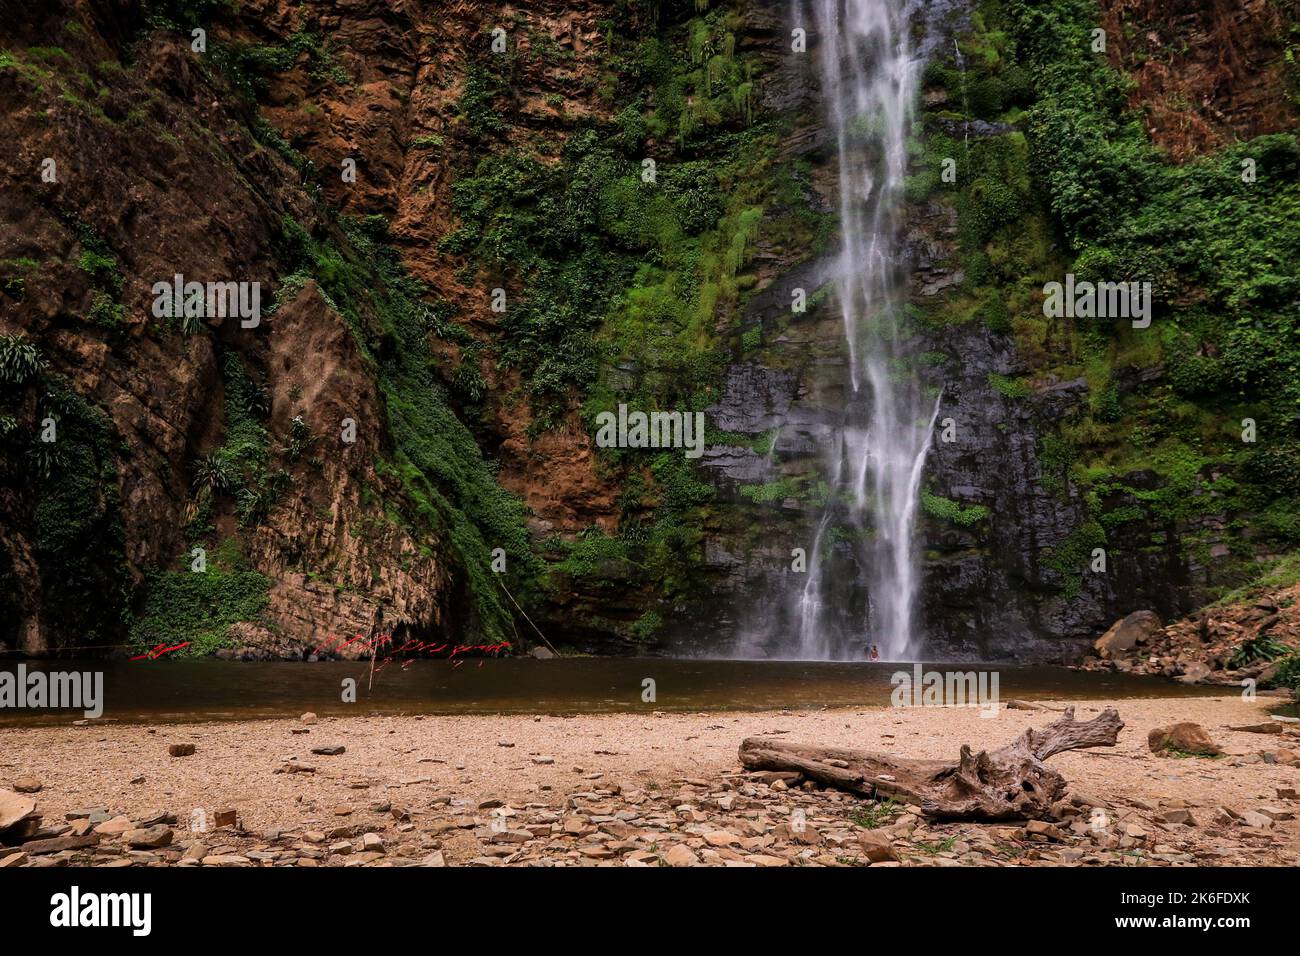 View to the Wli Waterfalls, the highest waterfall in Ghana and the tallest in West Africa Stock Photo